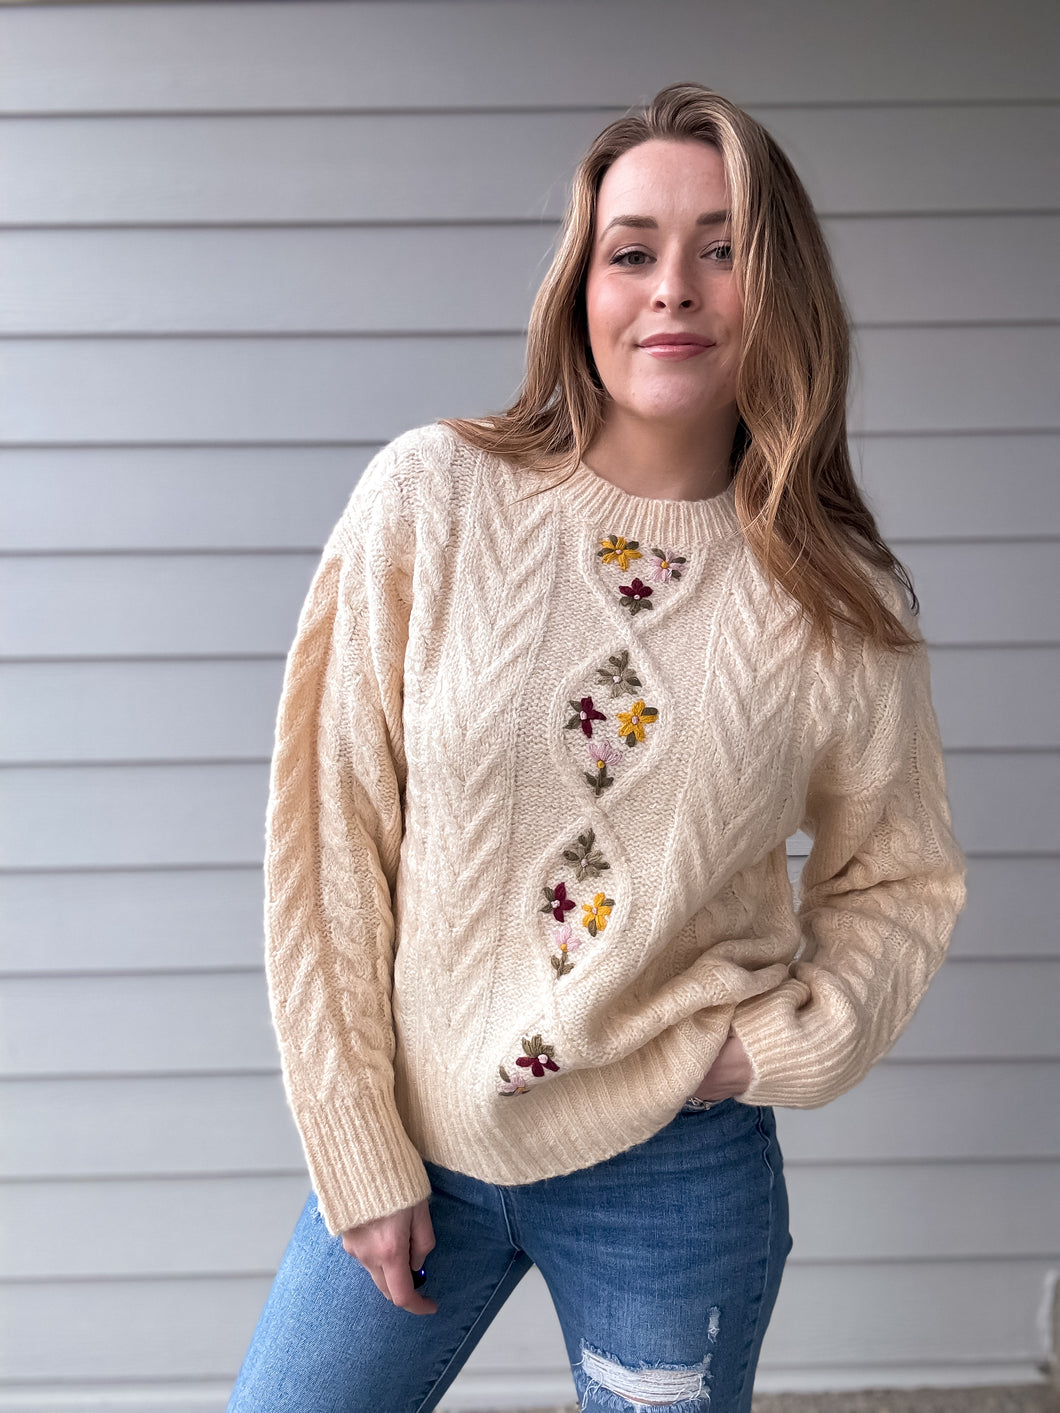 Floral Embroidered Sweater